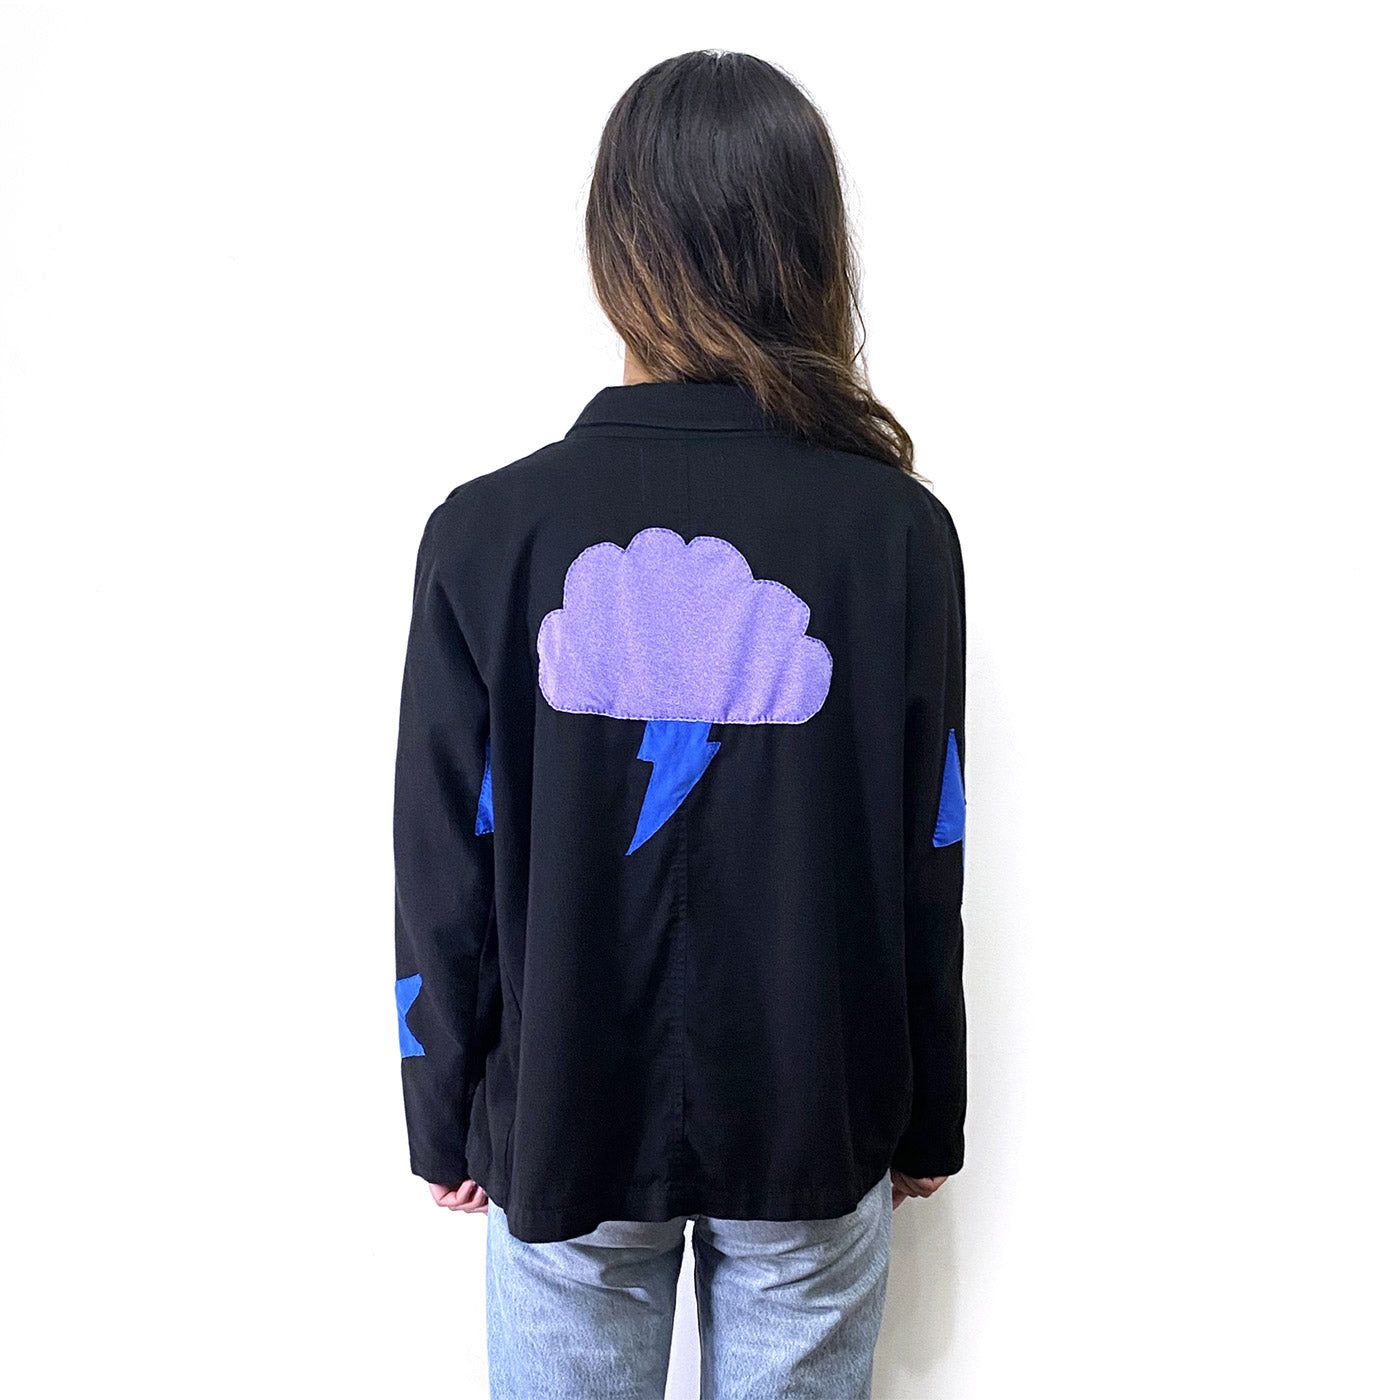 Back of young person with long brown hair wearing a short black jacket with a light purple cloud sewn on the centre of the back and a few blue lightening bolts included in the hand stitched design